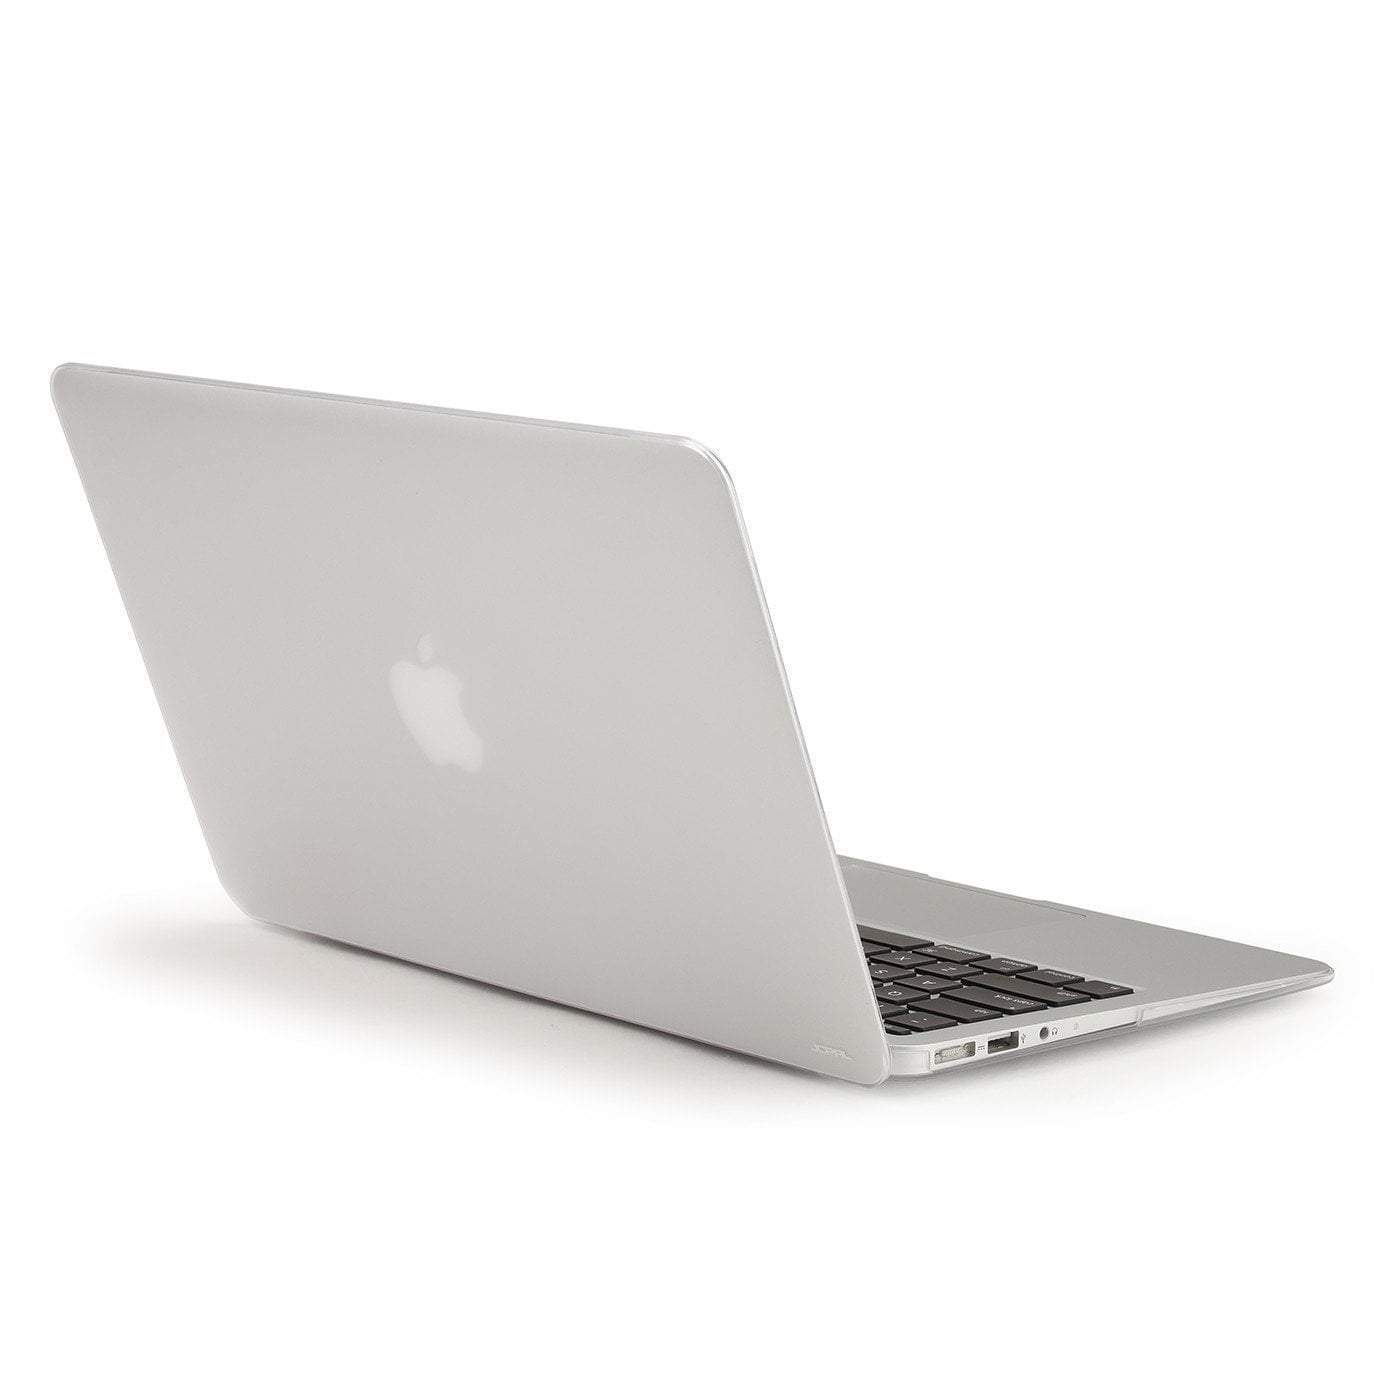 JCPal Case MacGuard Ultra-thin Protective Case for MacBook Air 11" MacBook Air 11" / Crystal